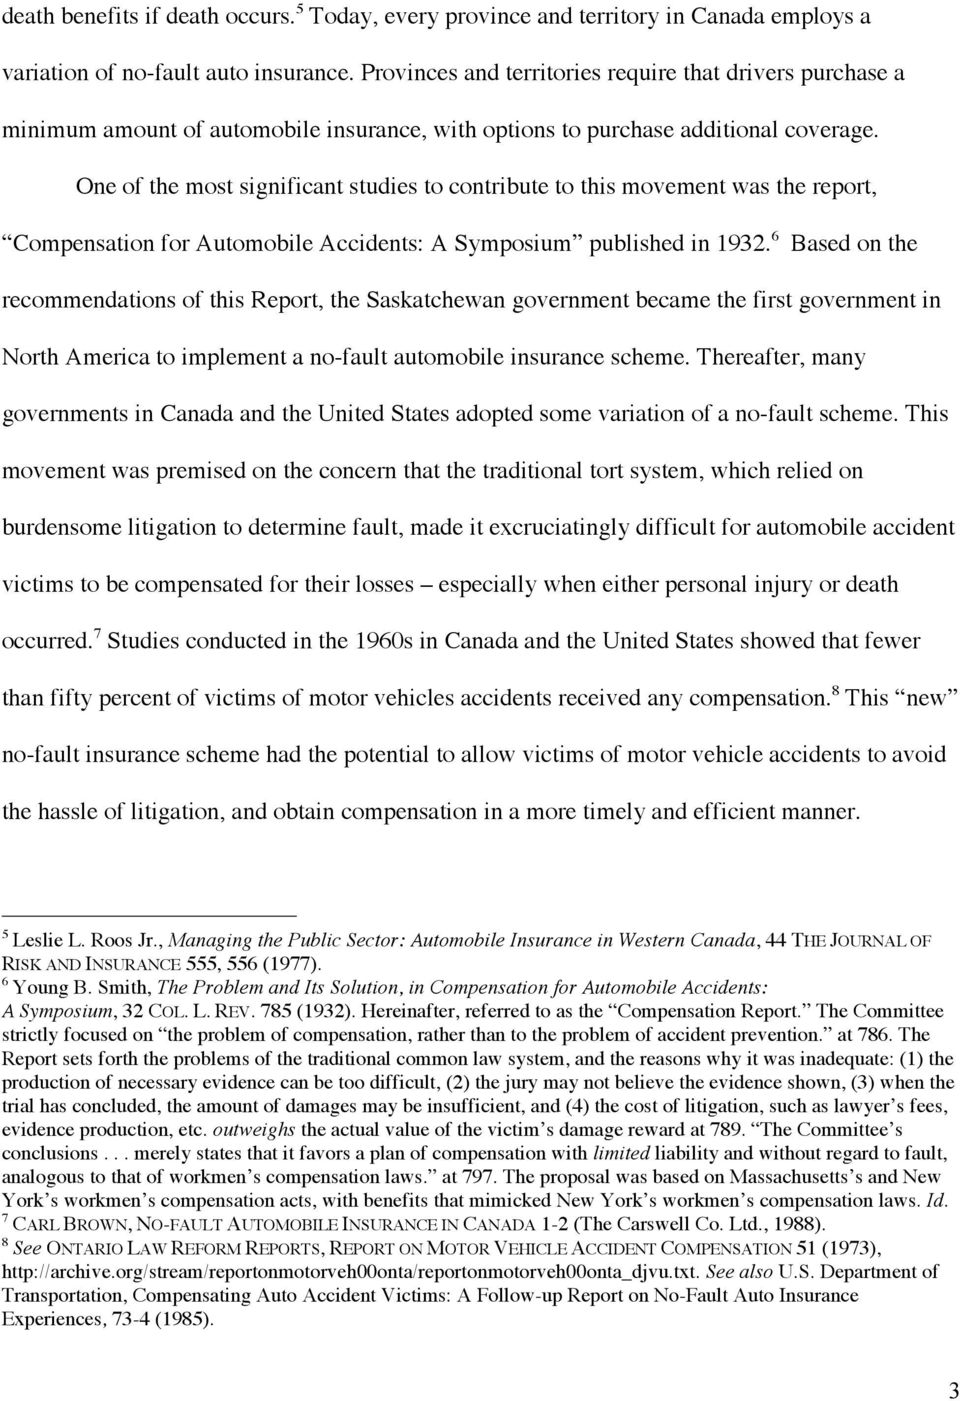 One of the most significant studies to contribute to this movement was the report, Compensation for Automobile Accidents: A Symposium published in 1932.